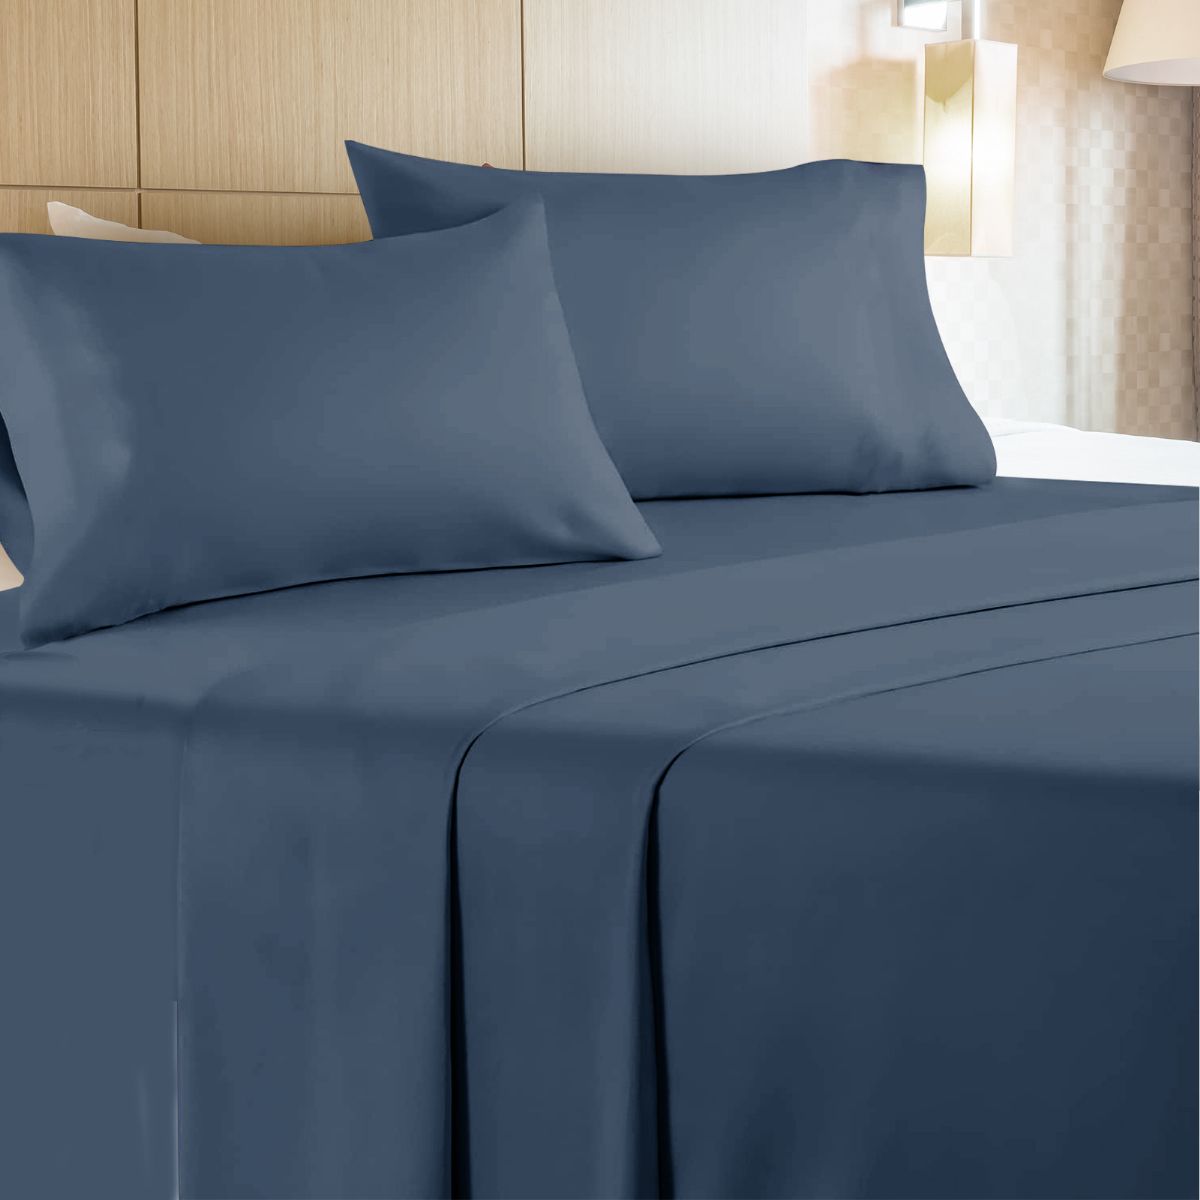 6 Sets 4 Piece Microfiber Bed Sheet Set Twin Size In Navy - Bed Sheet Sets